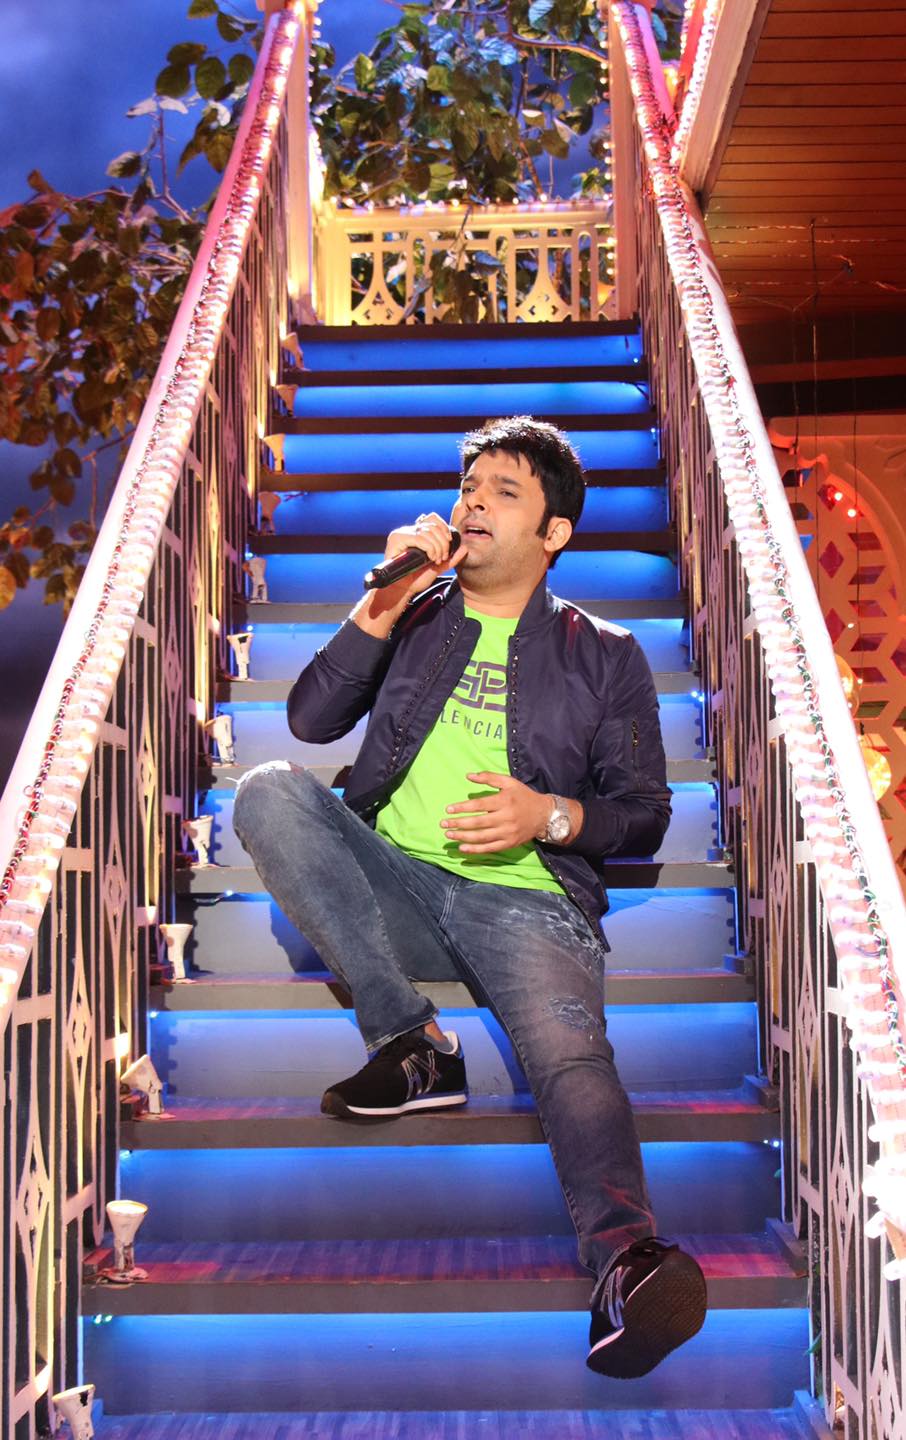 Kapil Sharma, sitting on a staircase, singing into a microphone